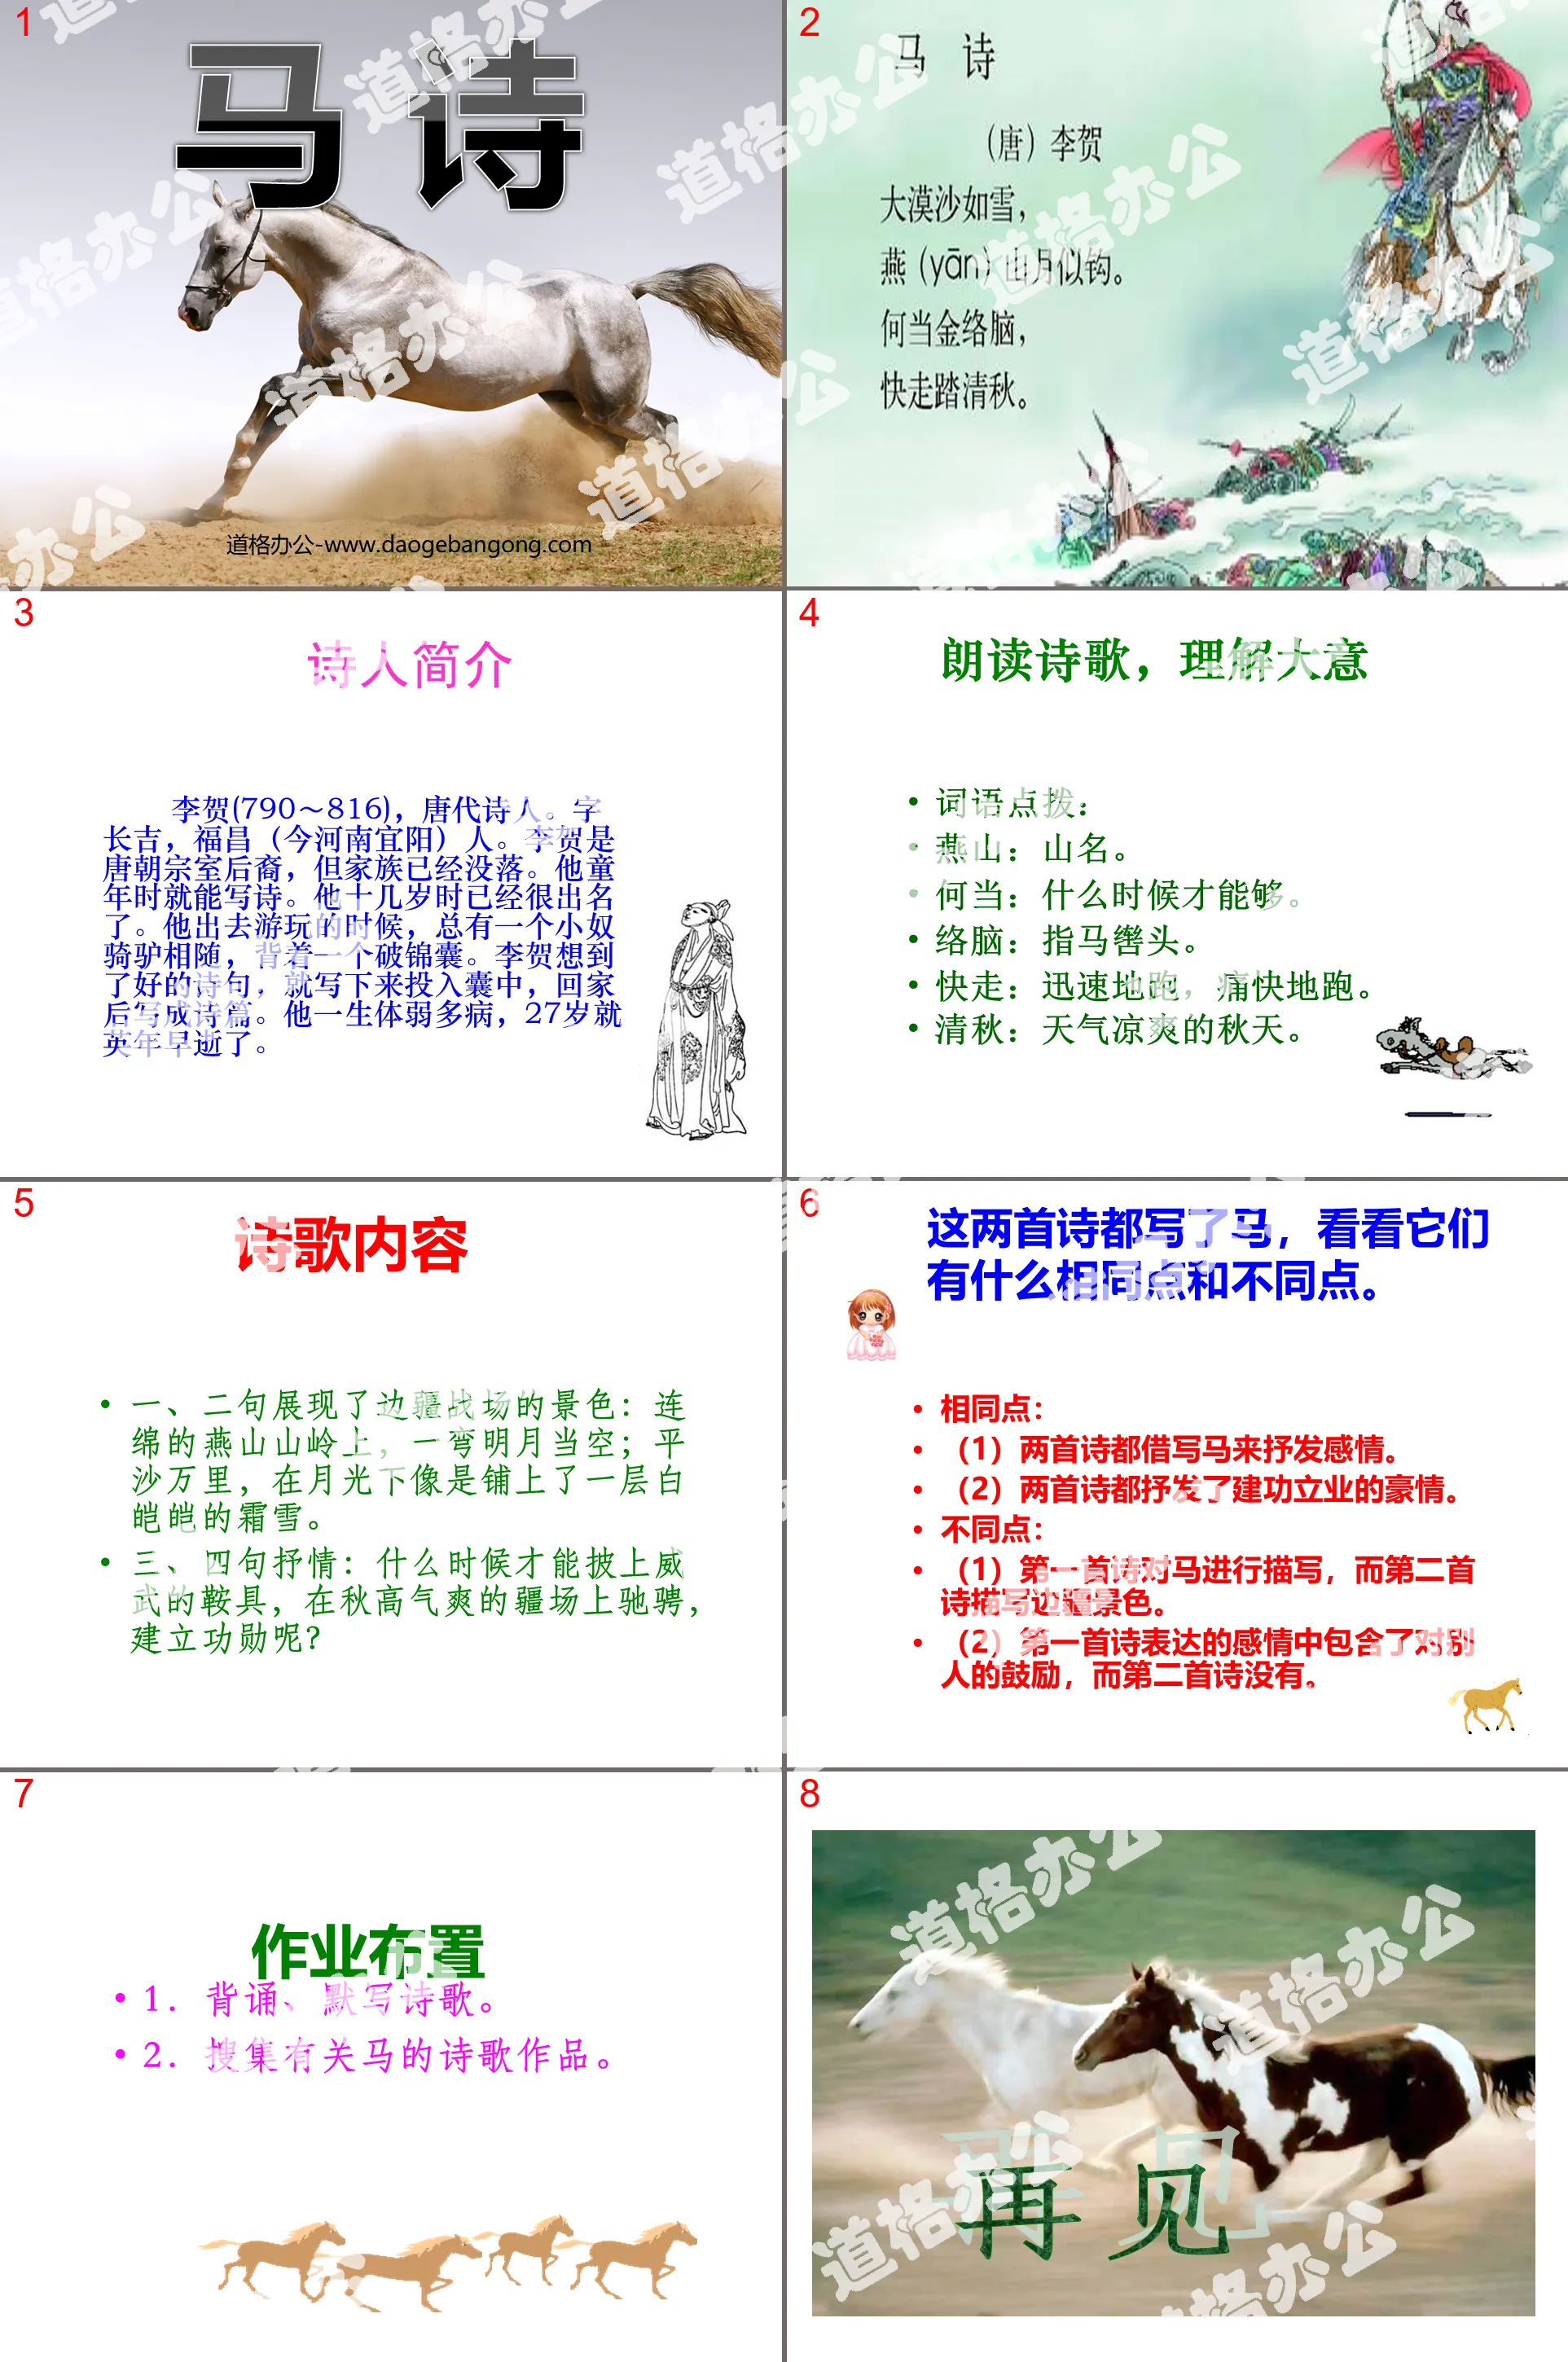 "Horse Poetry" PPT courseware